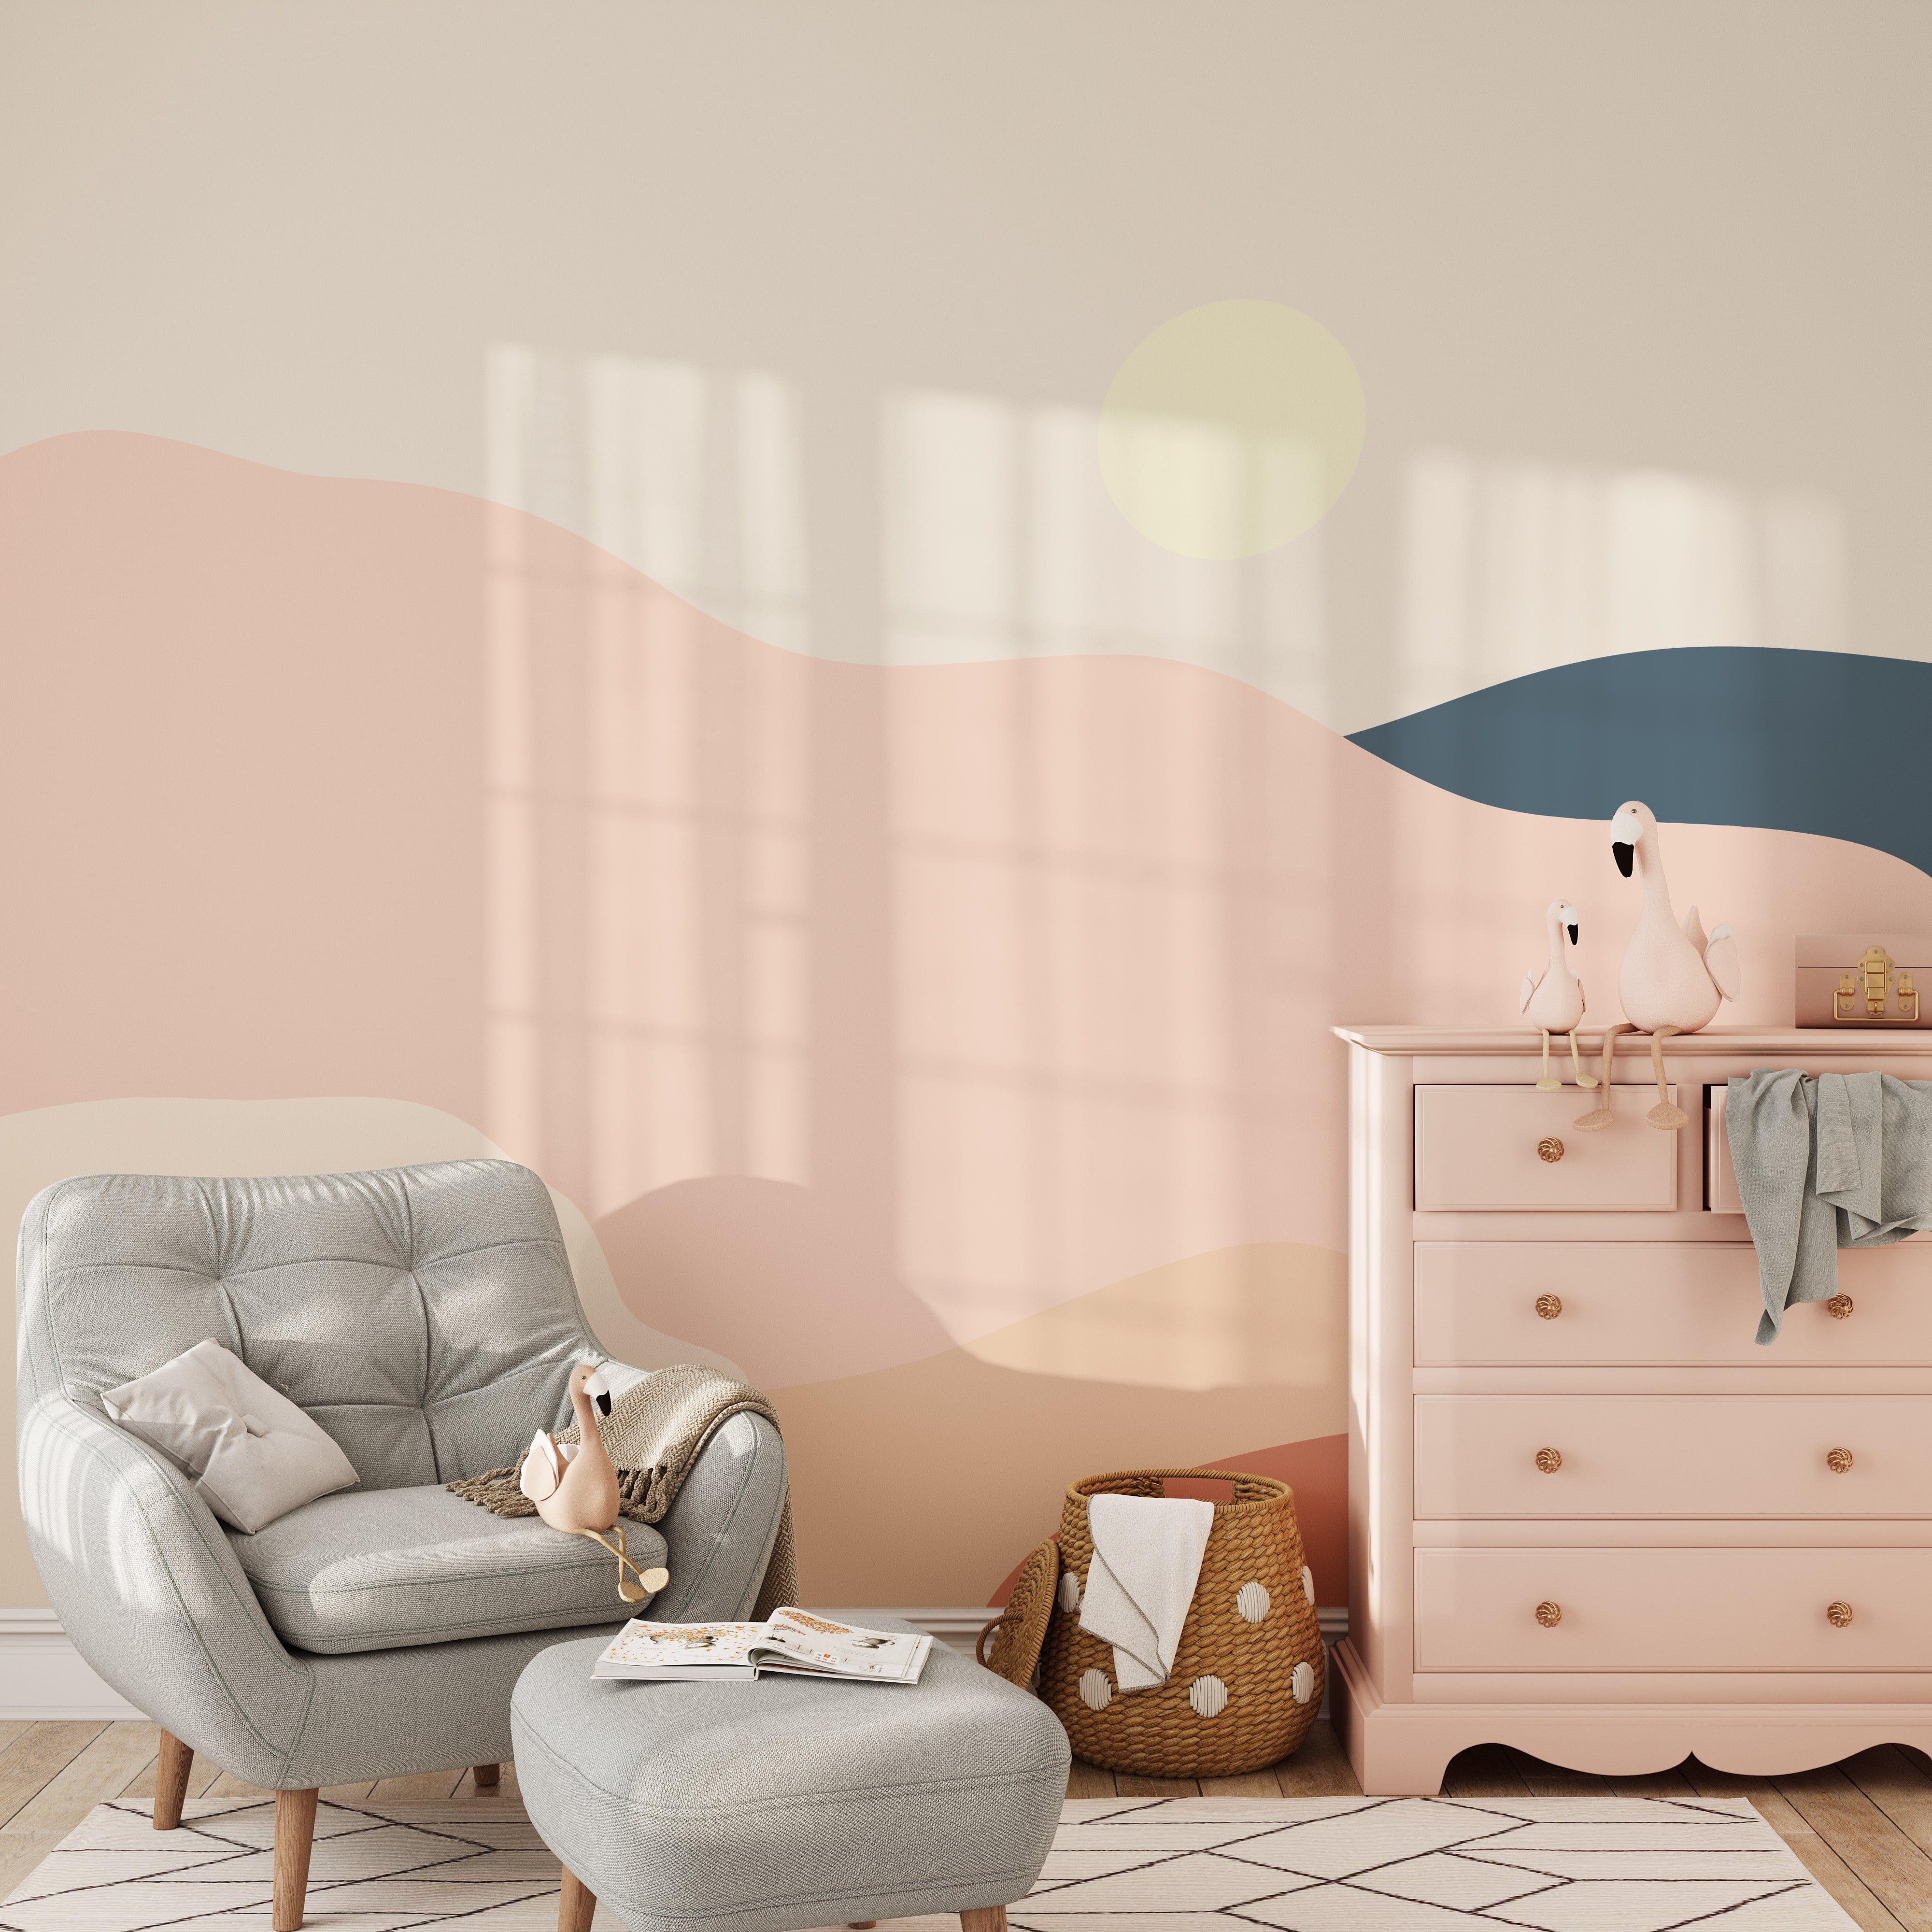 Pastel Playground Kids Mural Wallpaper in a cozy nursery setting, featuring a gray armchair with a matching ottoman, a pink dresser, and decorative toys, creating a serene and playful atmosphere